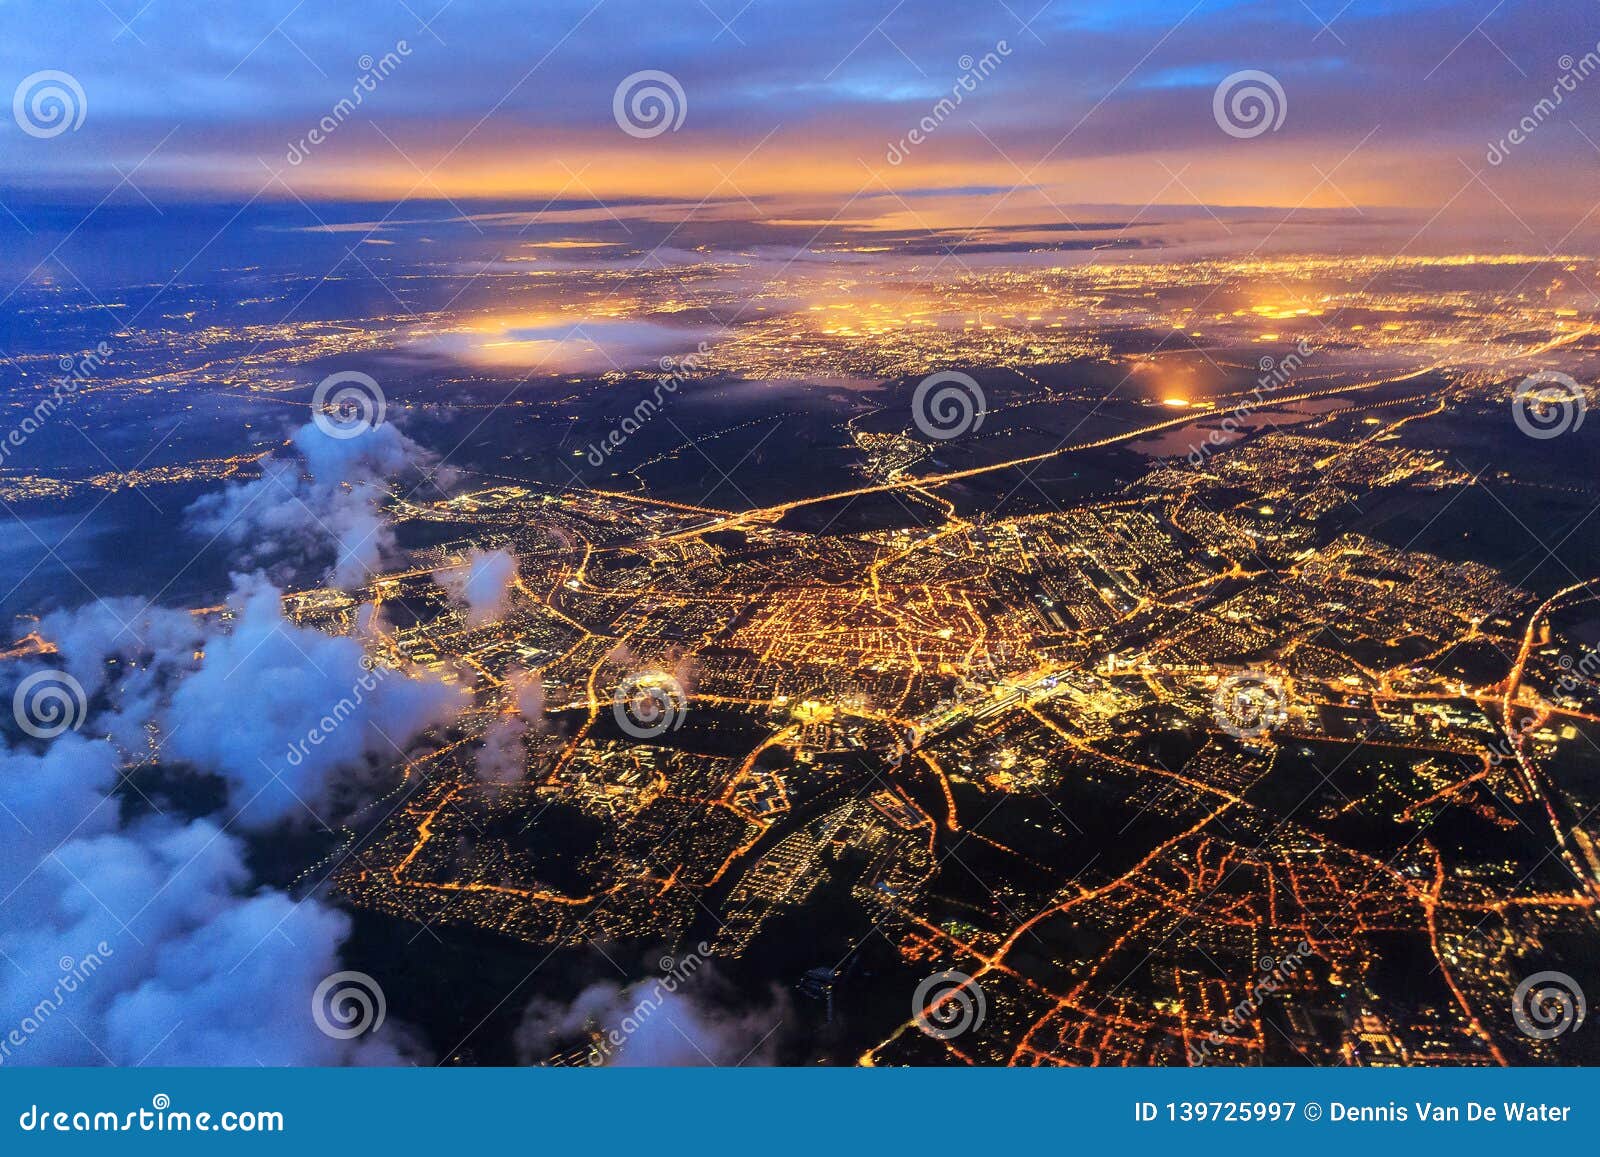 leiden from the sky at night night